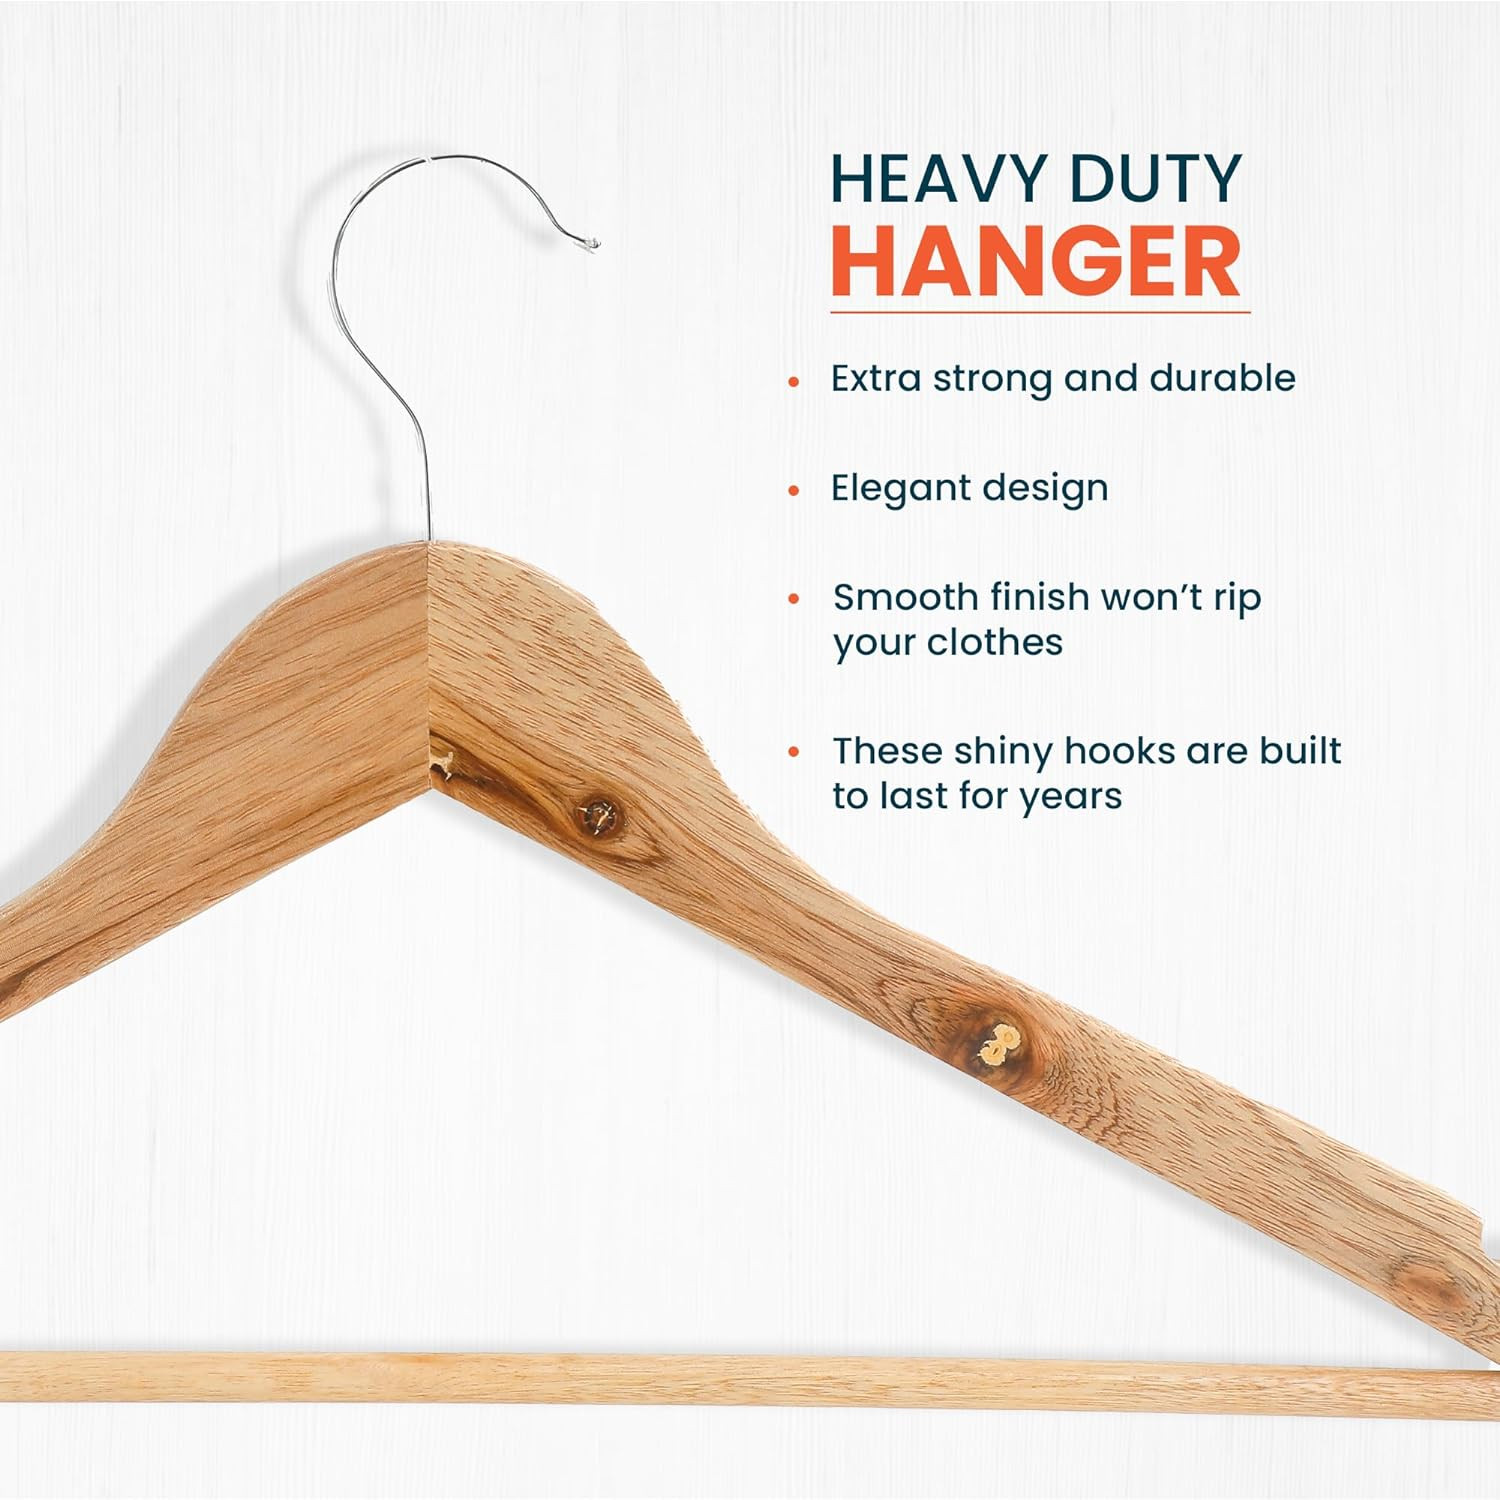 Kuber IndustriesWooden Cloth Hanger Set of 5 With Chromed Plated Steel Hook|Natural|